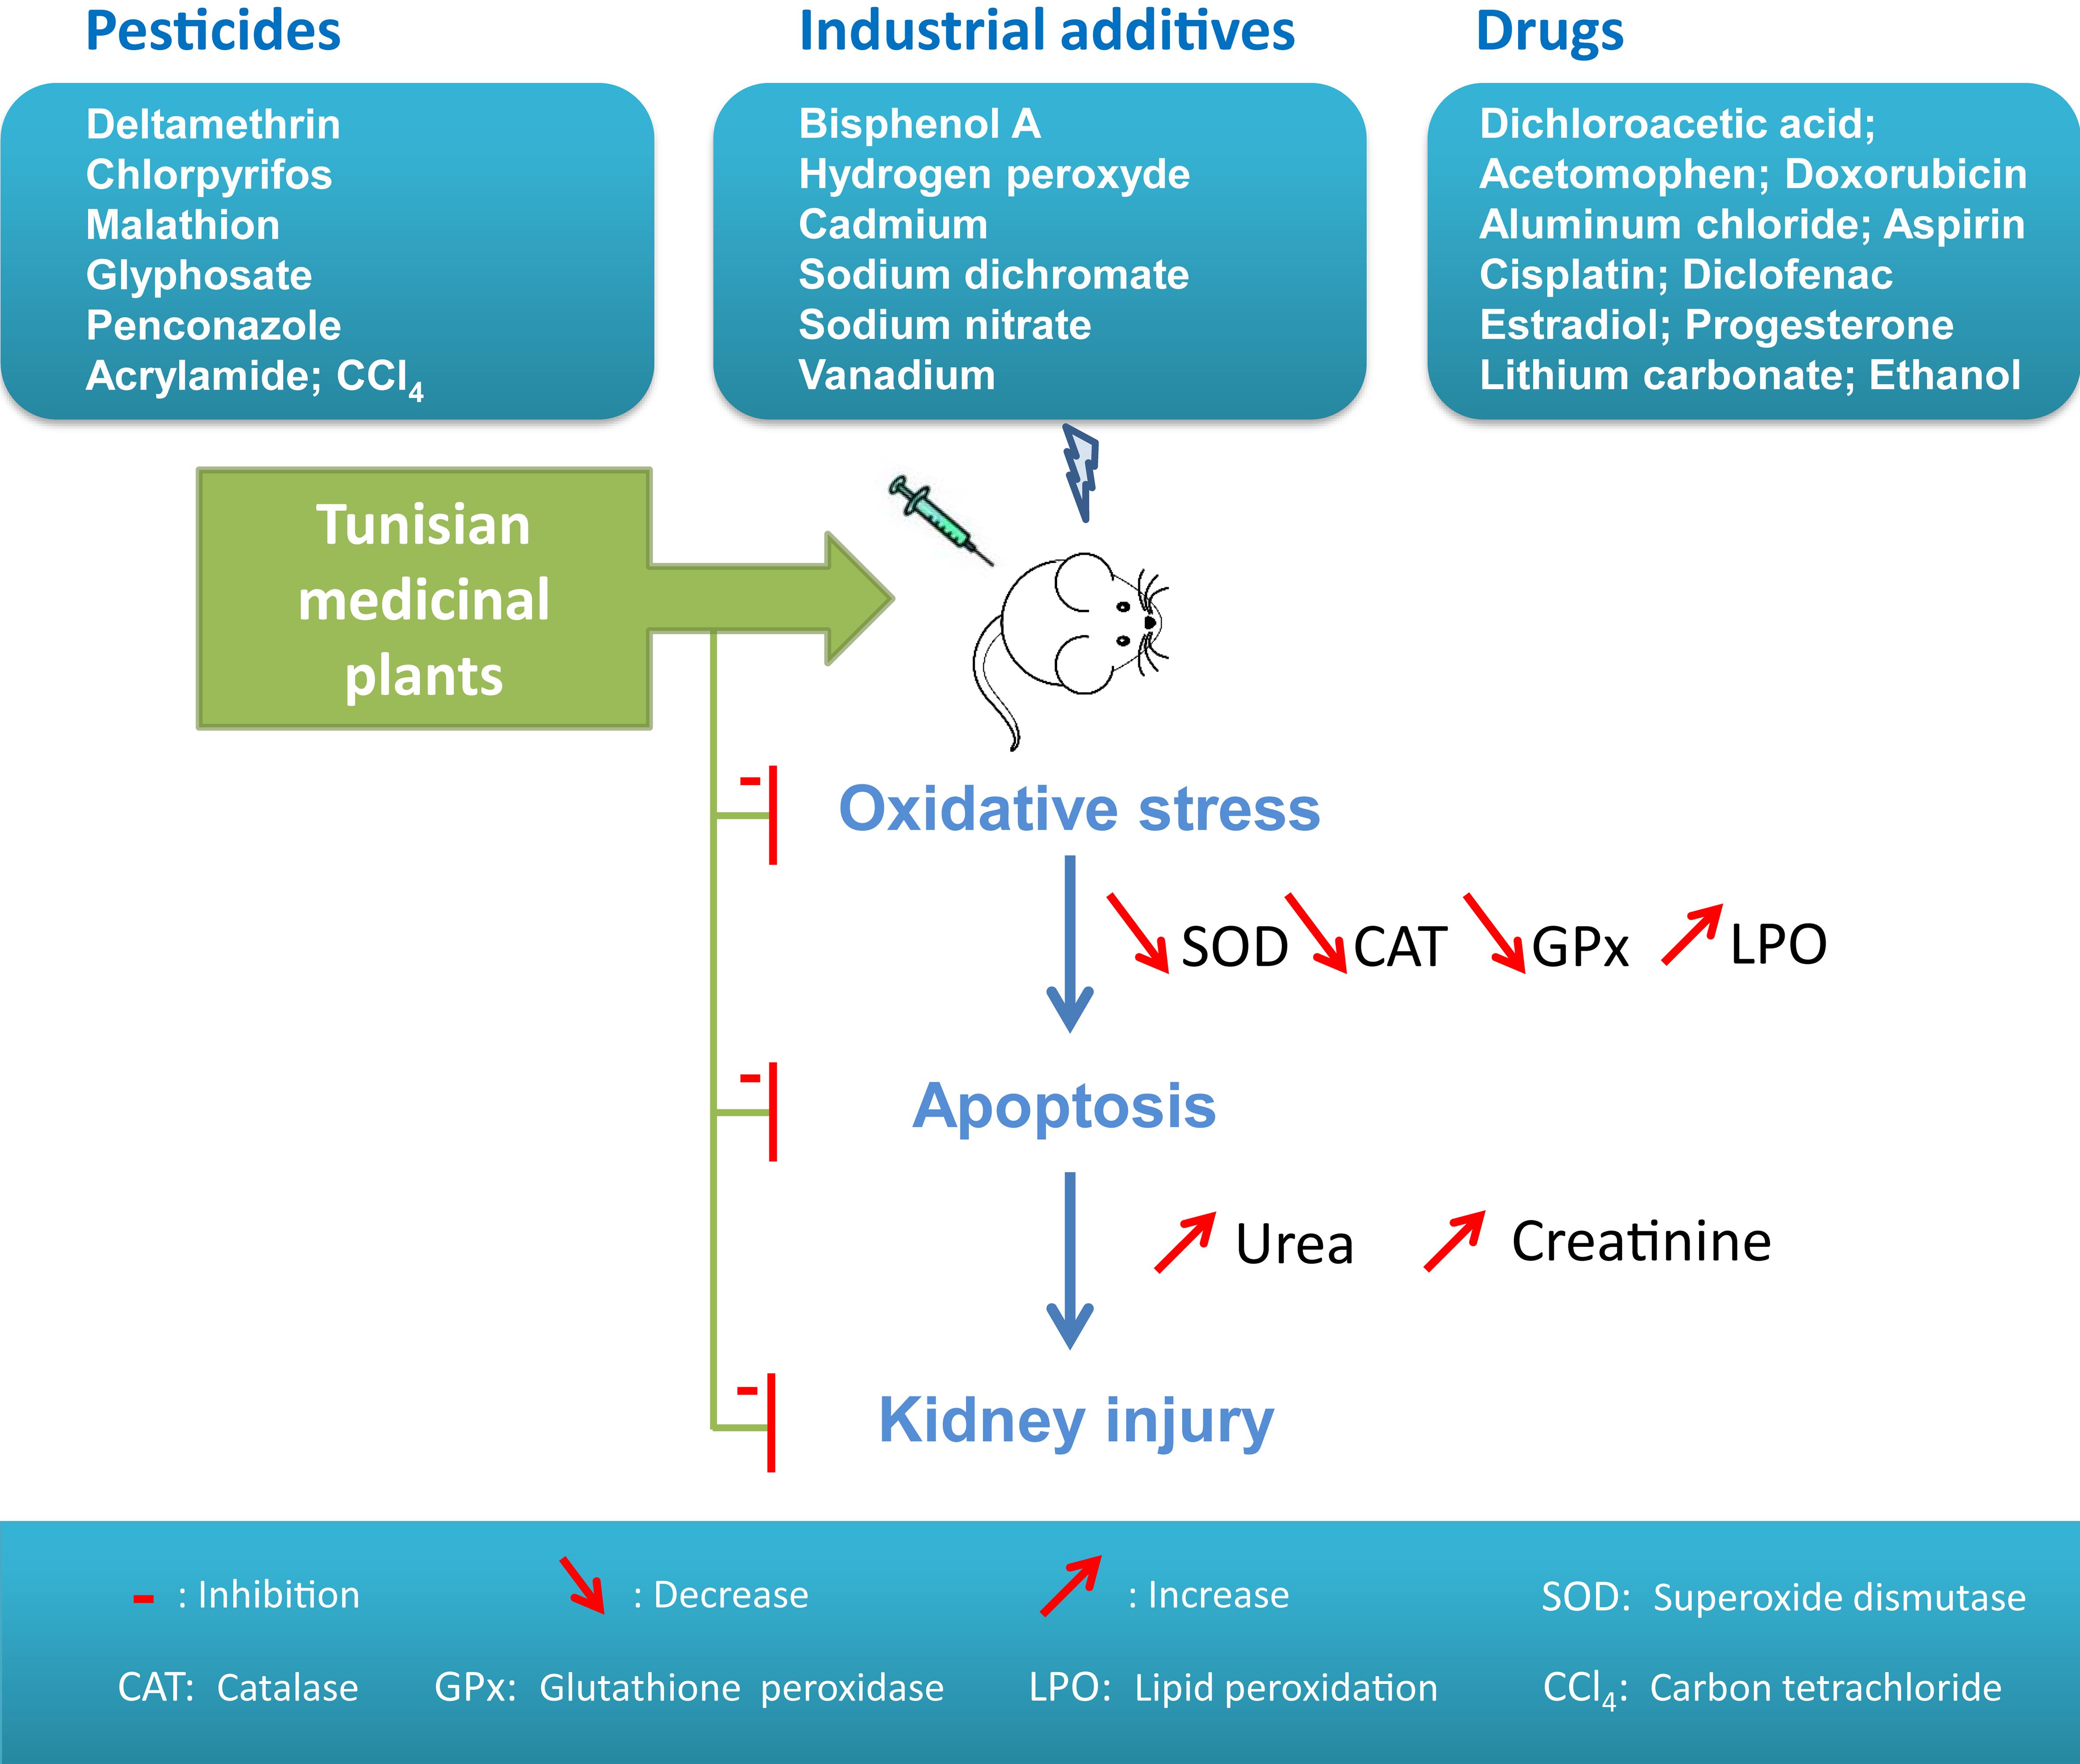 A diagram illustrating the proposed nephroprotective mechanism of Tunisian medicinal plants against nephrotoxins.